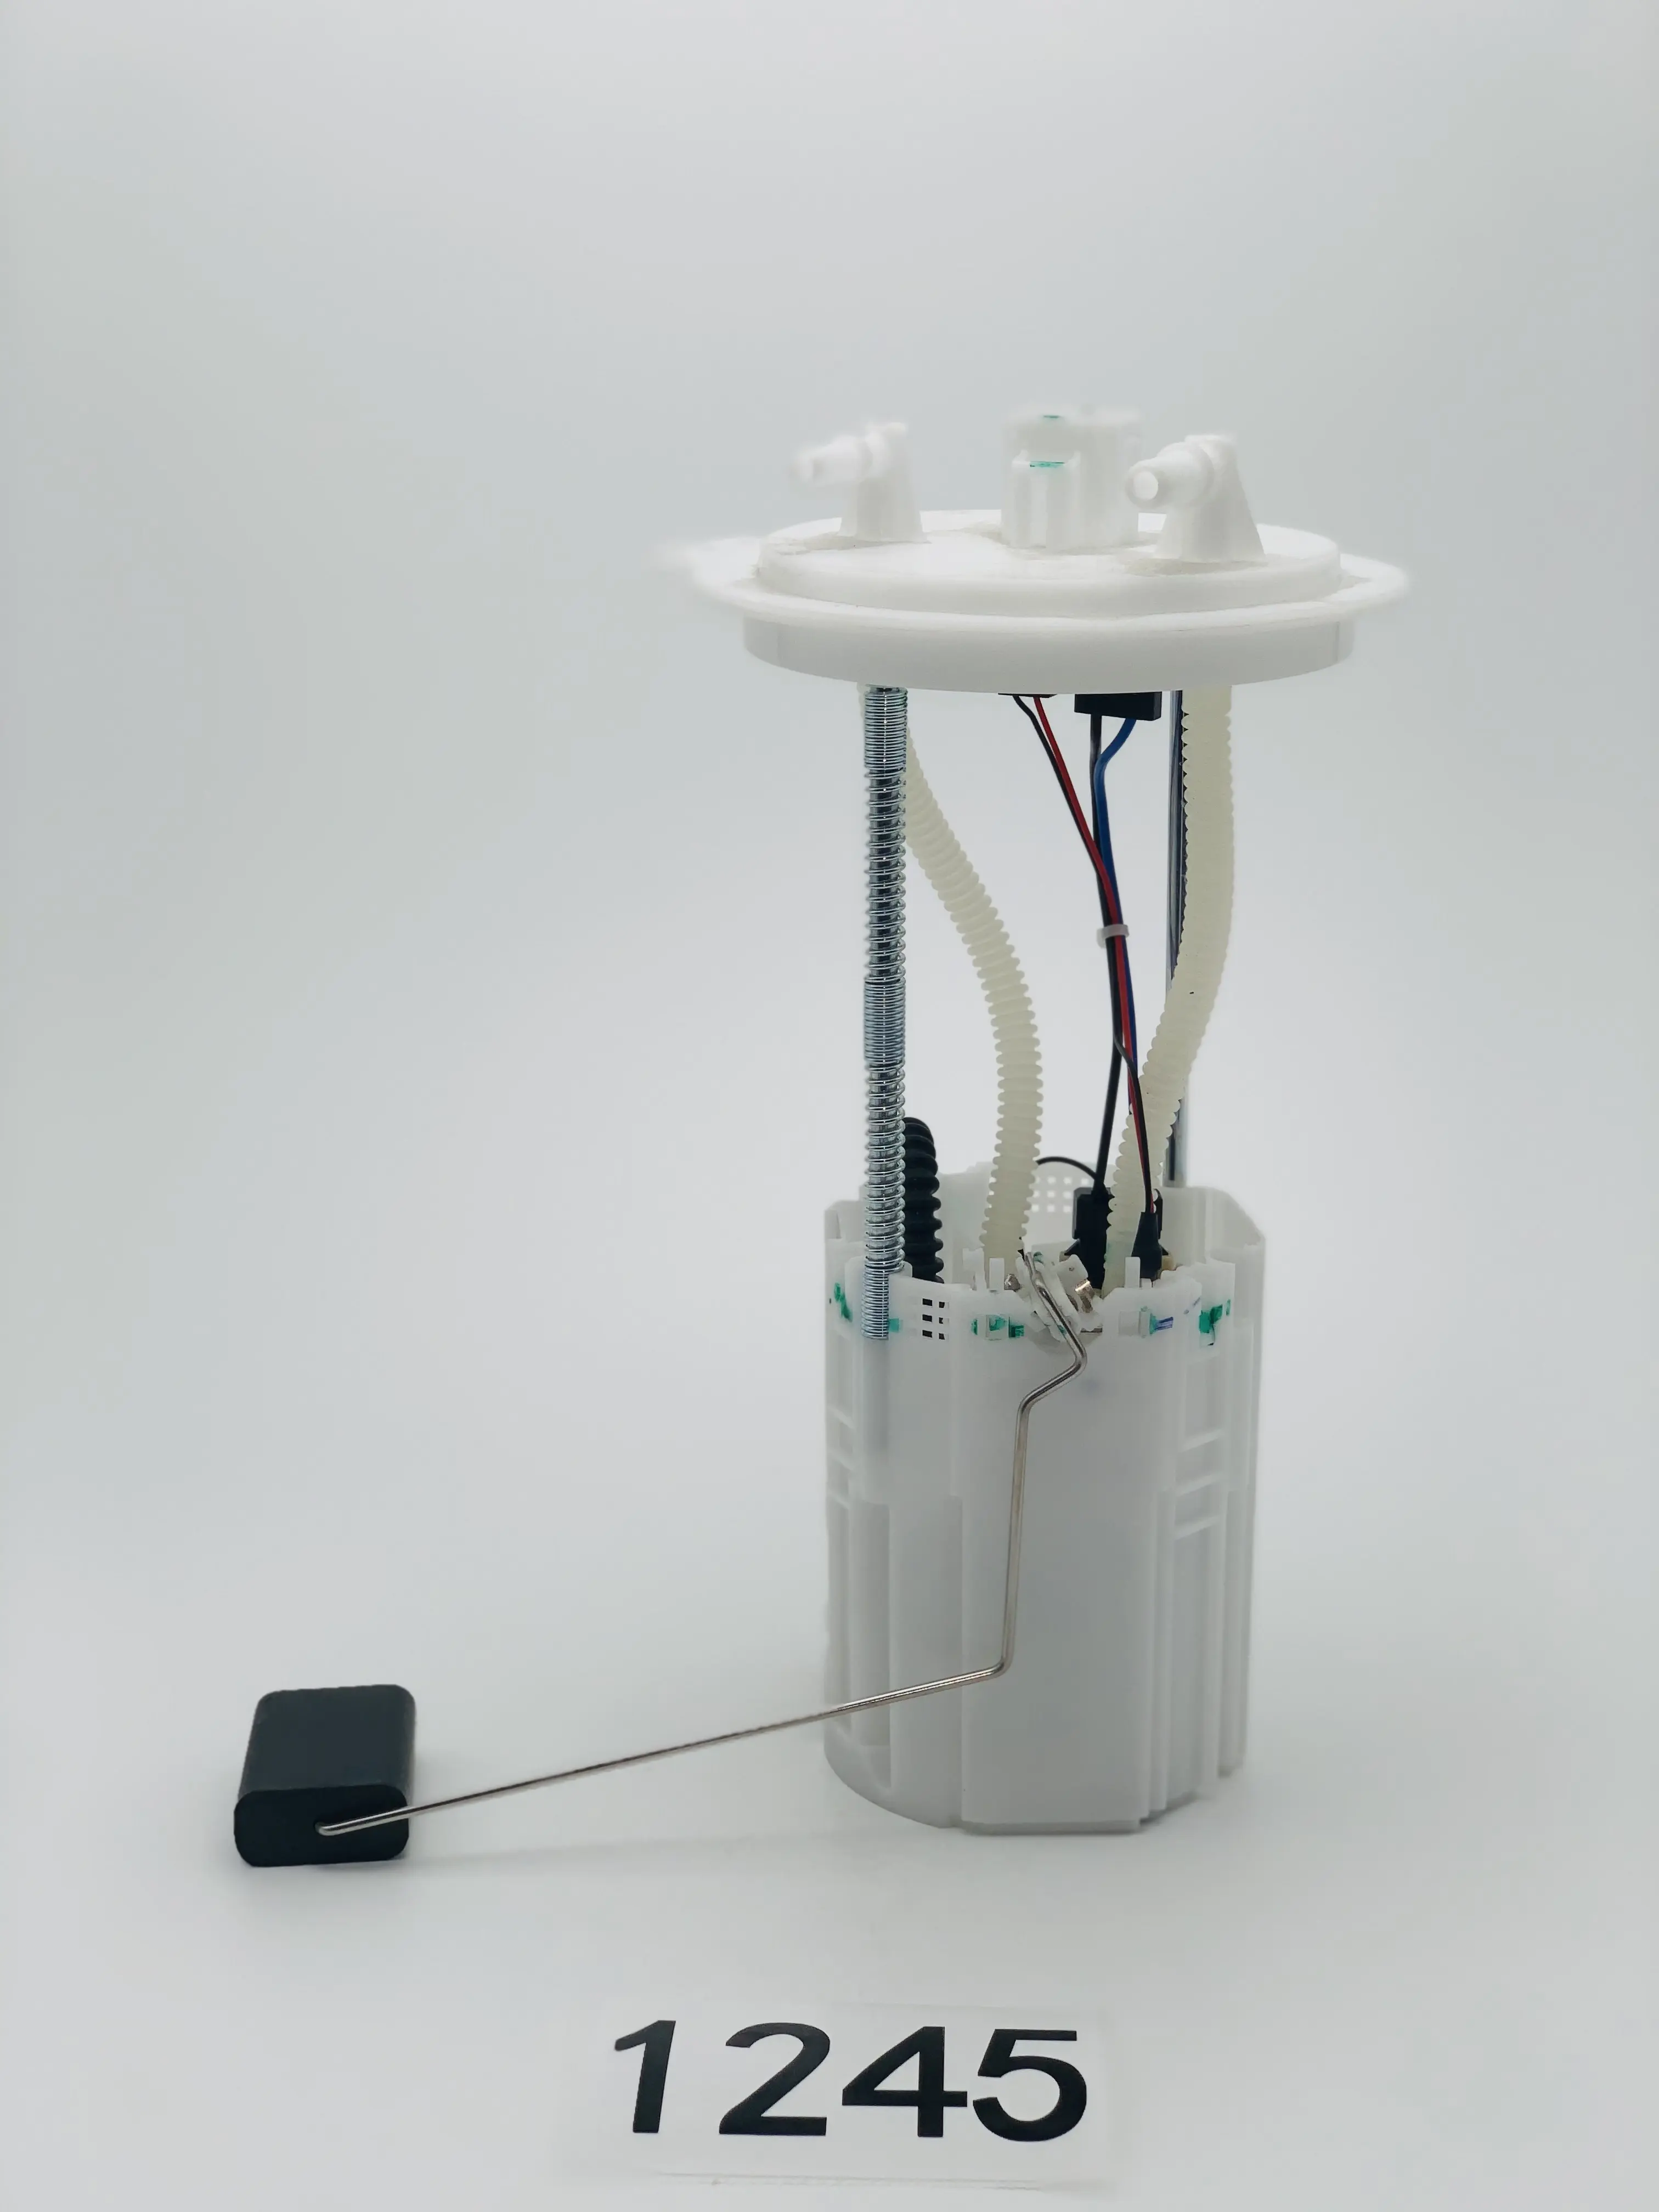 KS-A1245 HIGH Quality Fuel Pump Assembly for Great Wall F7 (Locat model)